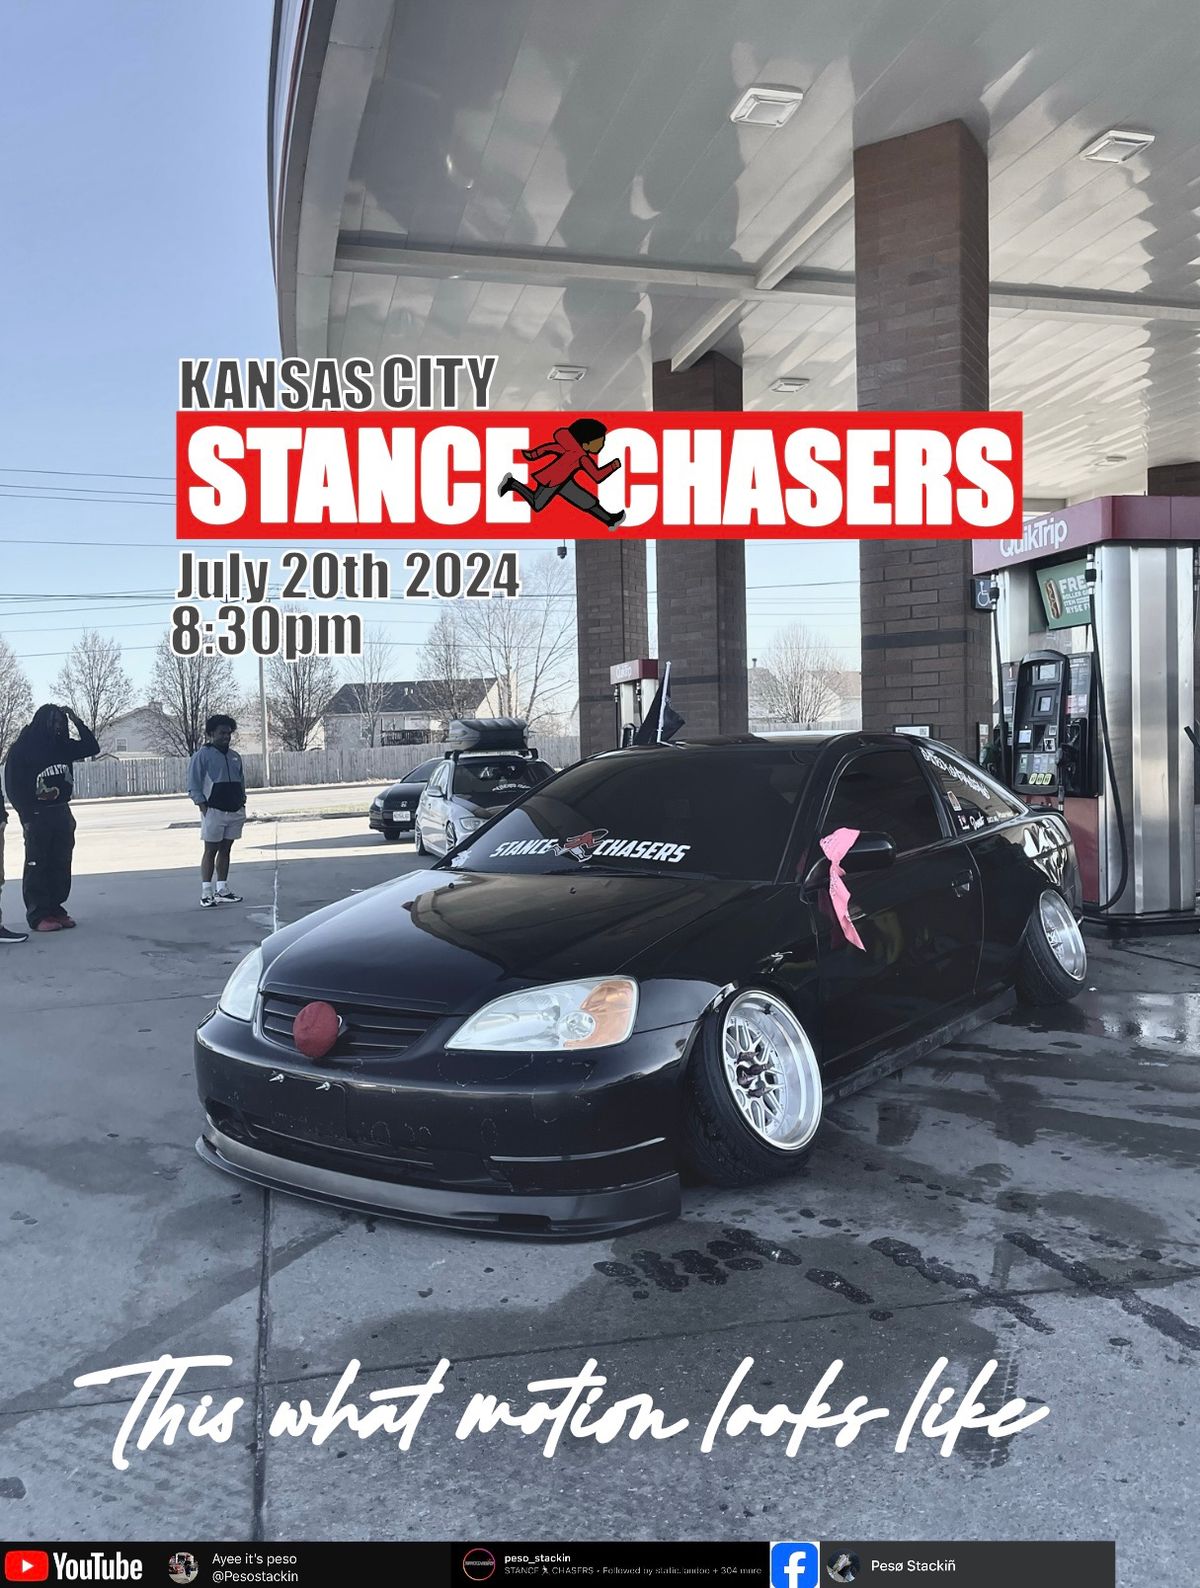 OFFICIAL STANCE CHASERS MEET